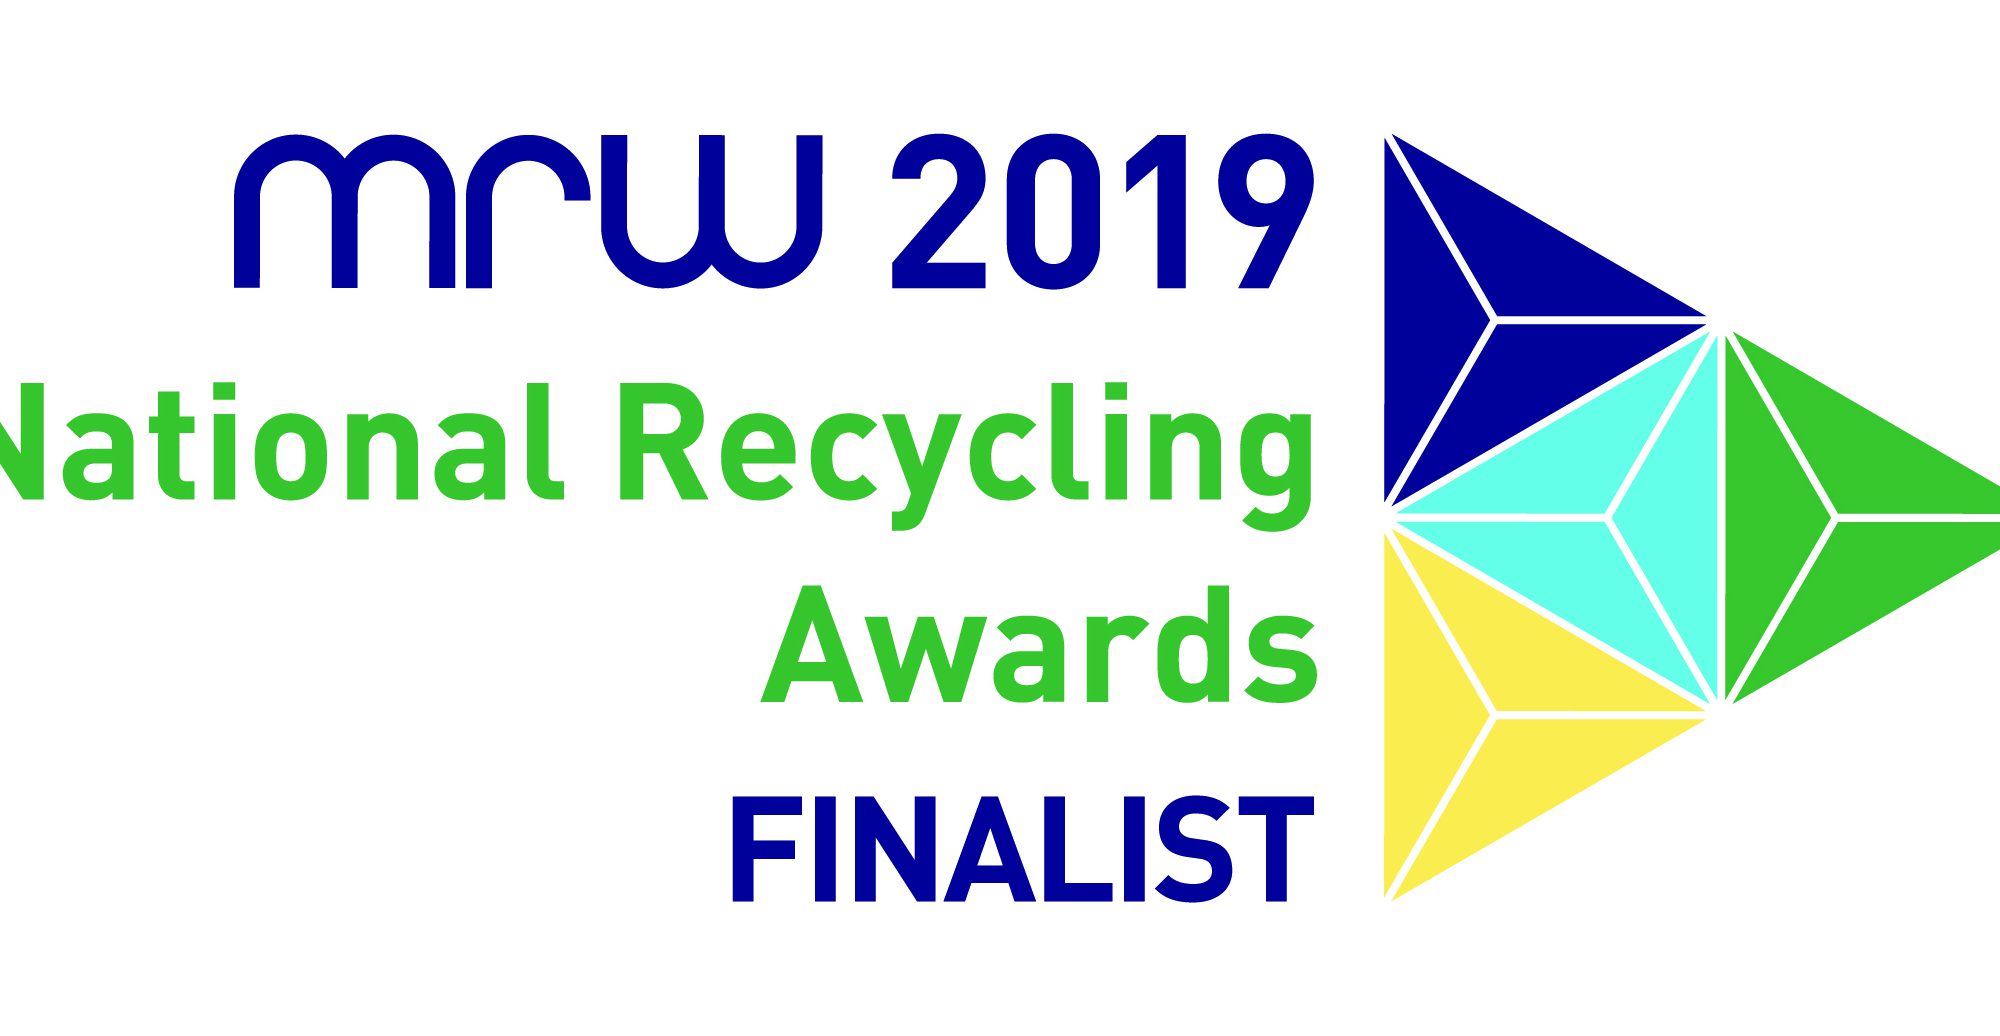 Slim Your Bin nominated for National Recycling Award